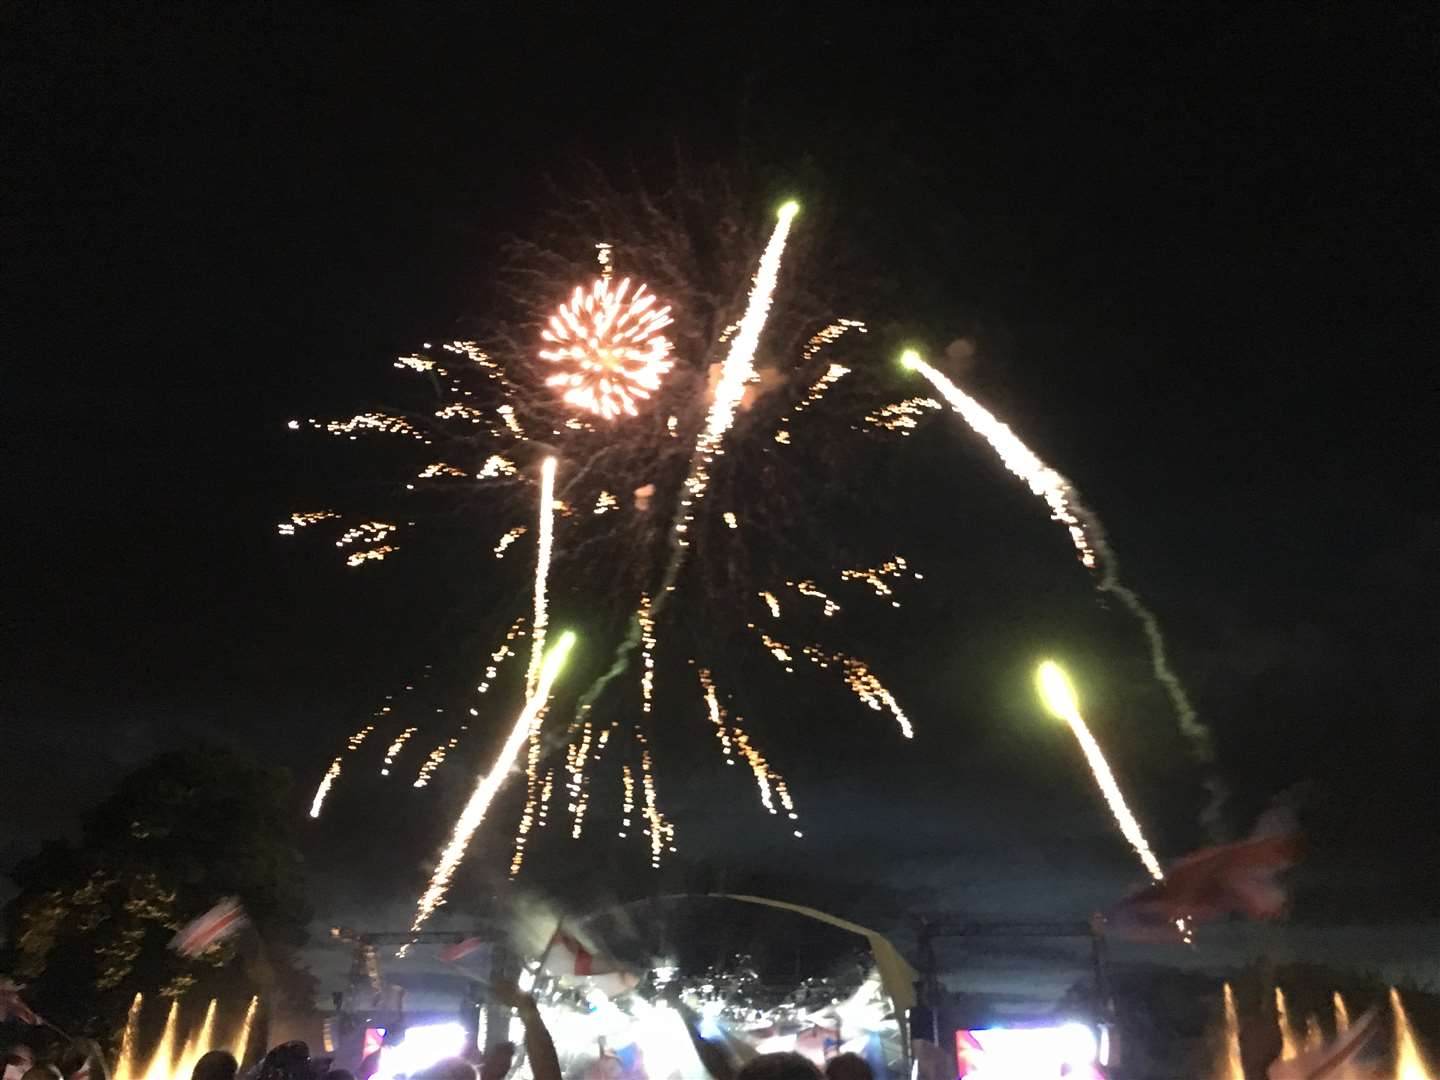 Fireworks lit up the sky to mark the end of the military proms at Rochester Castle